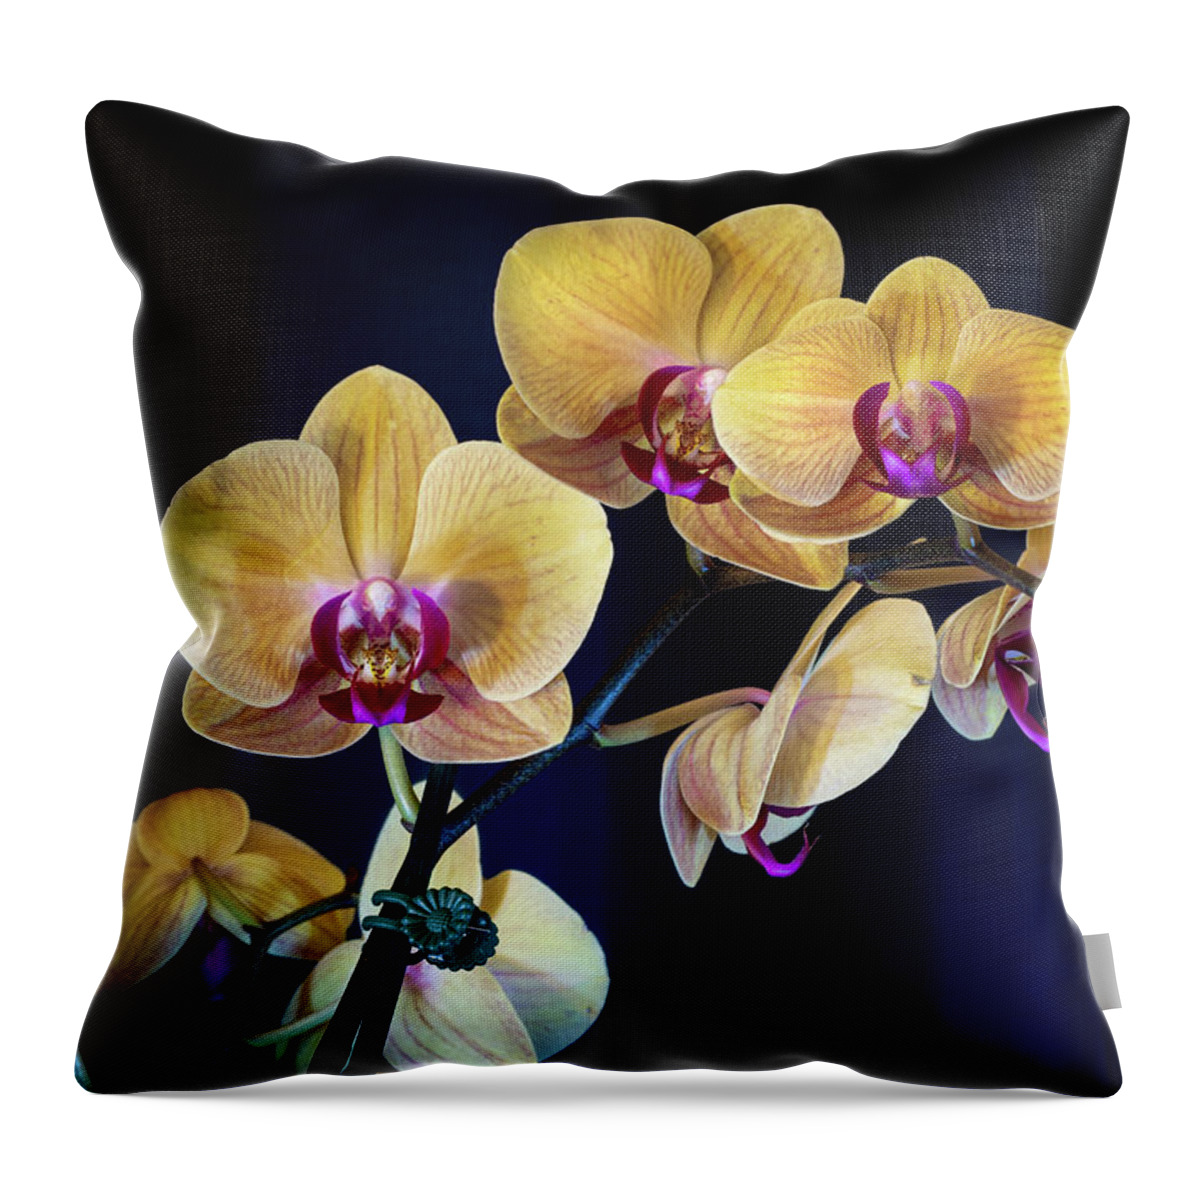 Bloom Throw Pillow featuring the photograph Orchids 4 by Dimitry Papkov